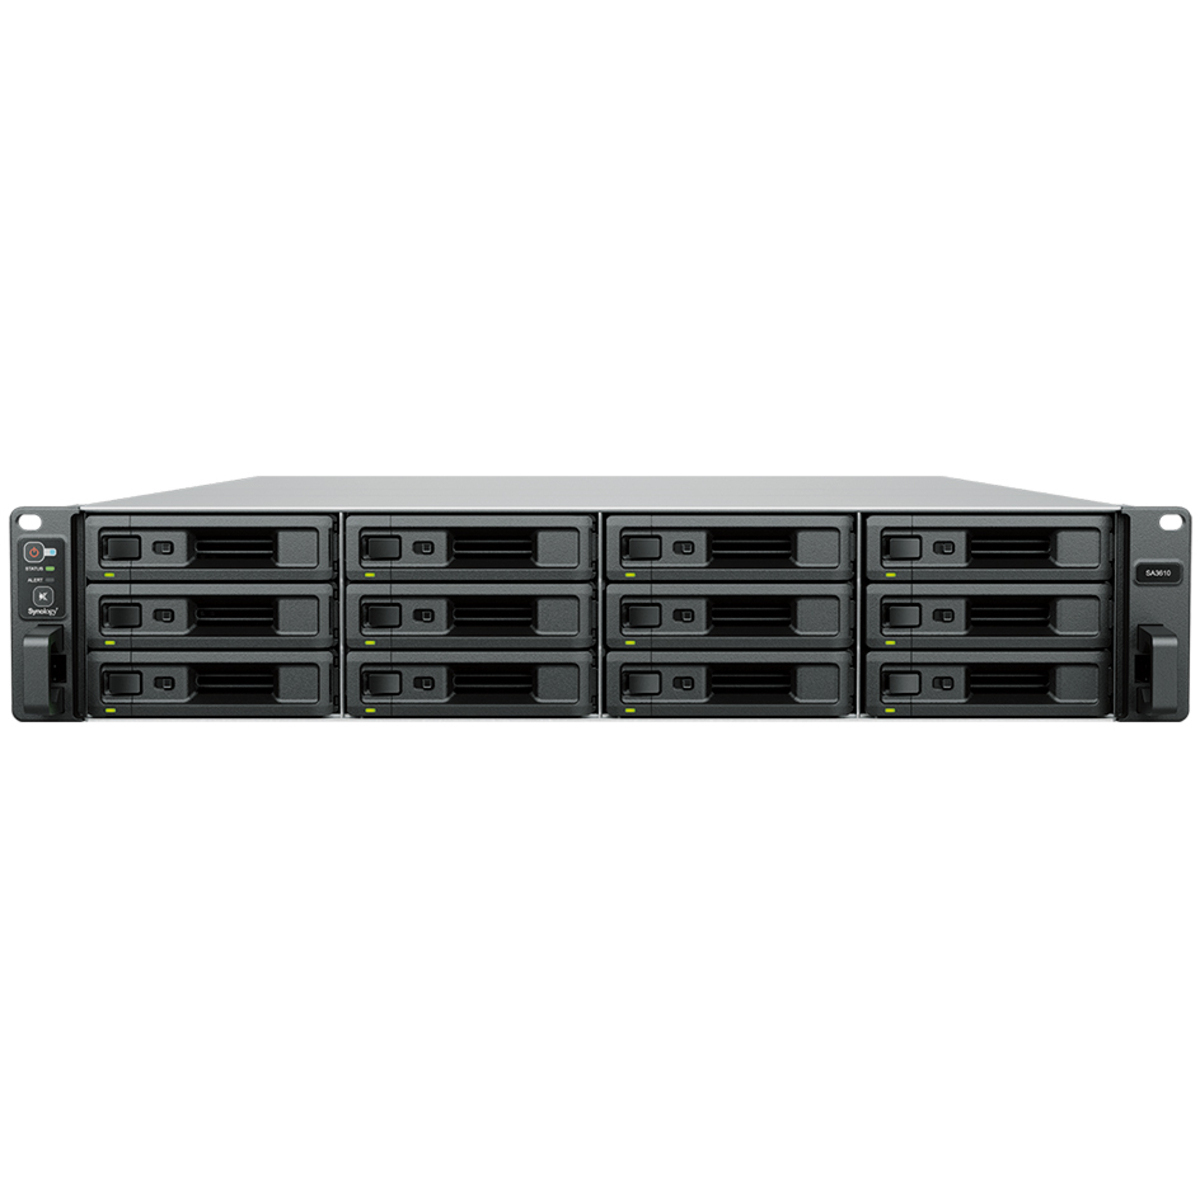 Synology RackStation SA3610 3.5tb 12-Bay RackMount Large Business / Enterprise NAS - Network Attached Storage Device 7x500gb Crucial MX500 CT500MX500SSD1 2.5 560/510MB/s SATA 6Gb/s SSD CONSUMER Class Drives Installed - Burn-In Tested RackStation SA3610